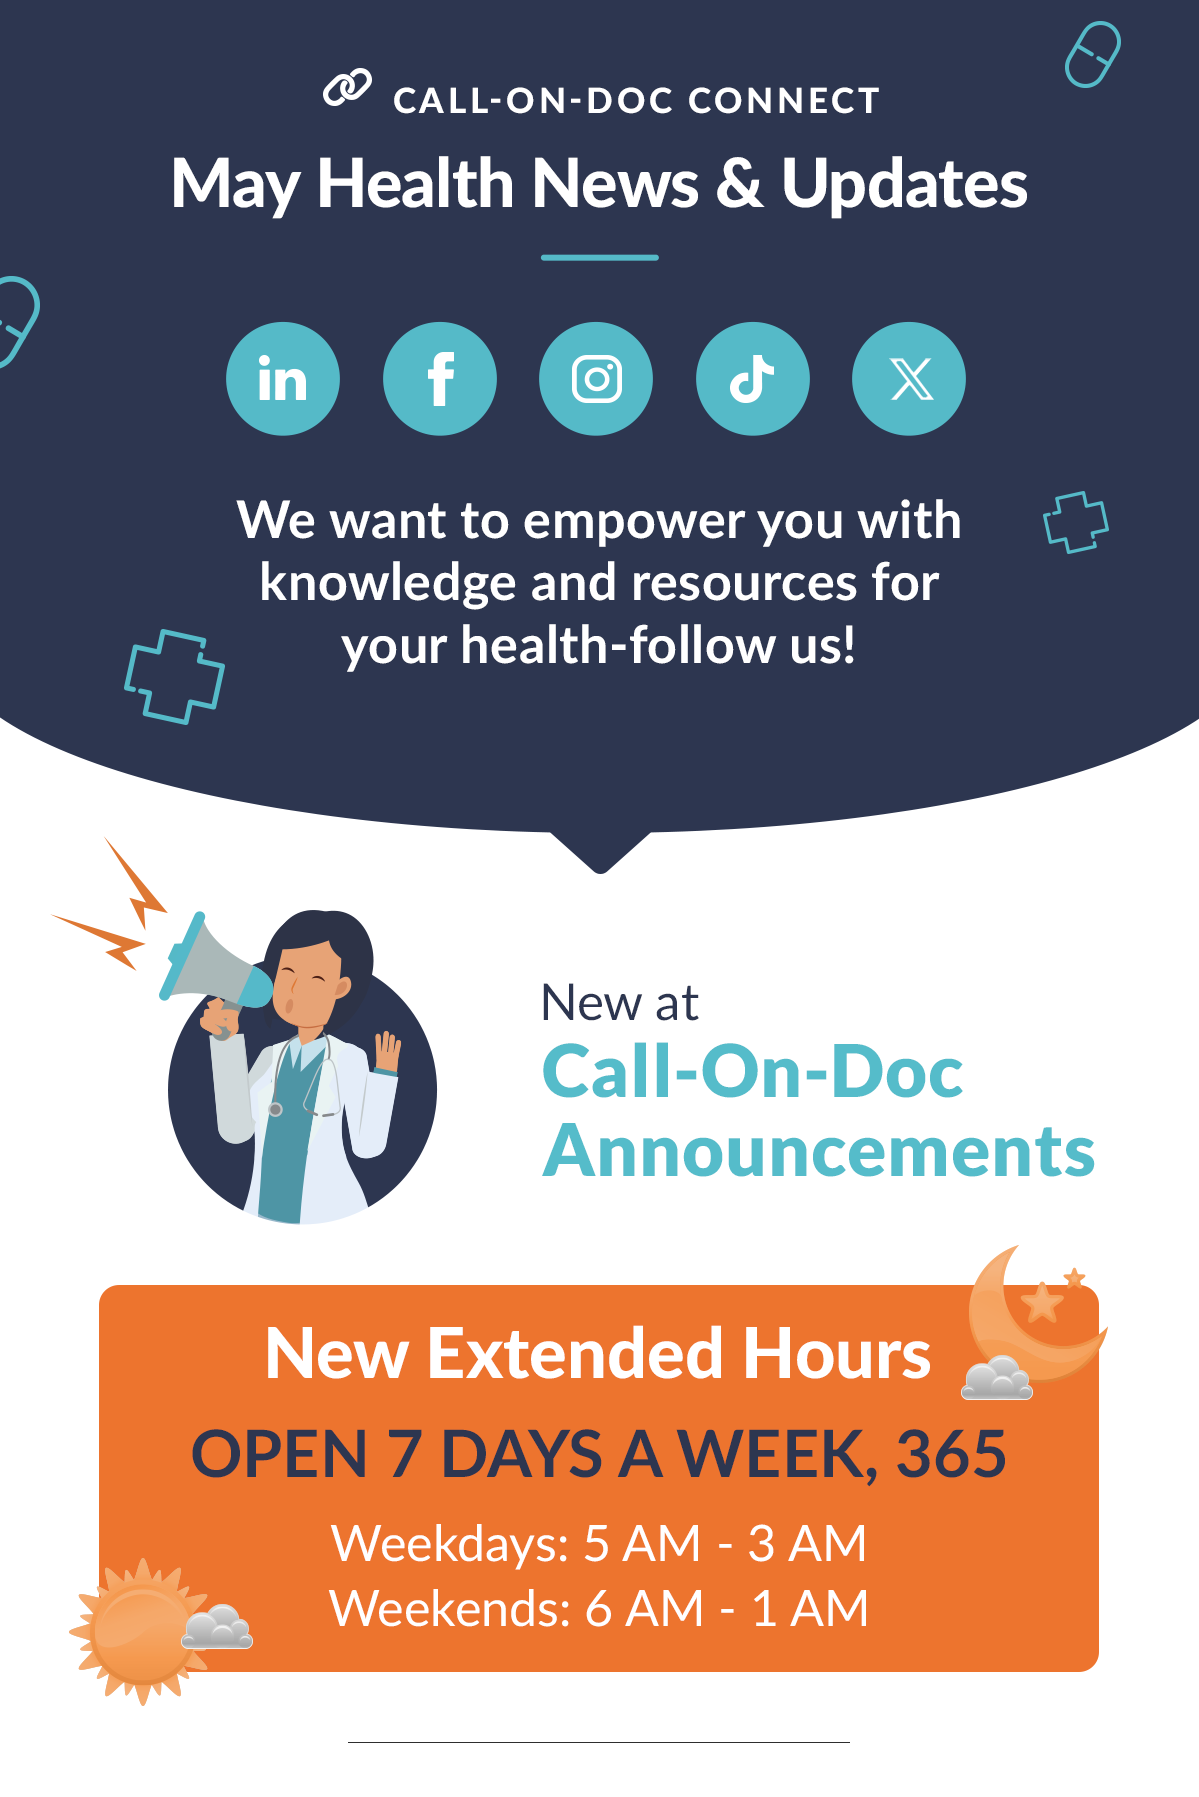 Visit Call-On-Doc